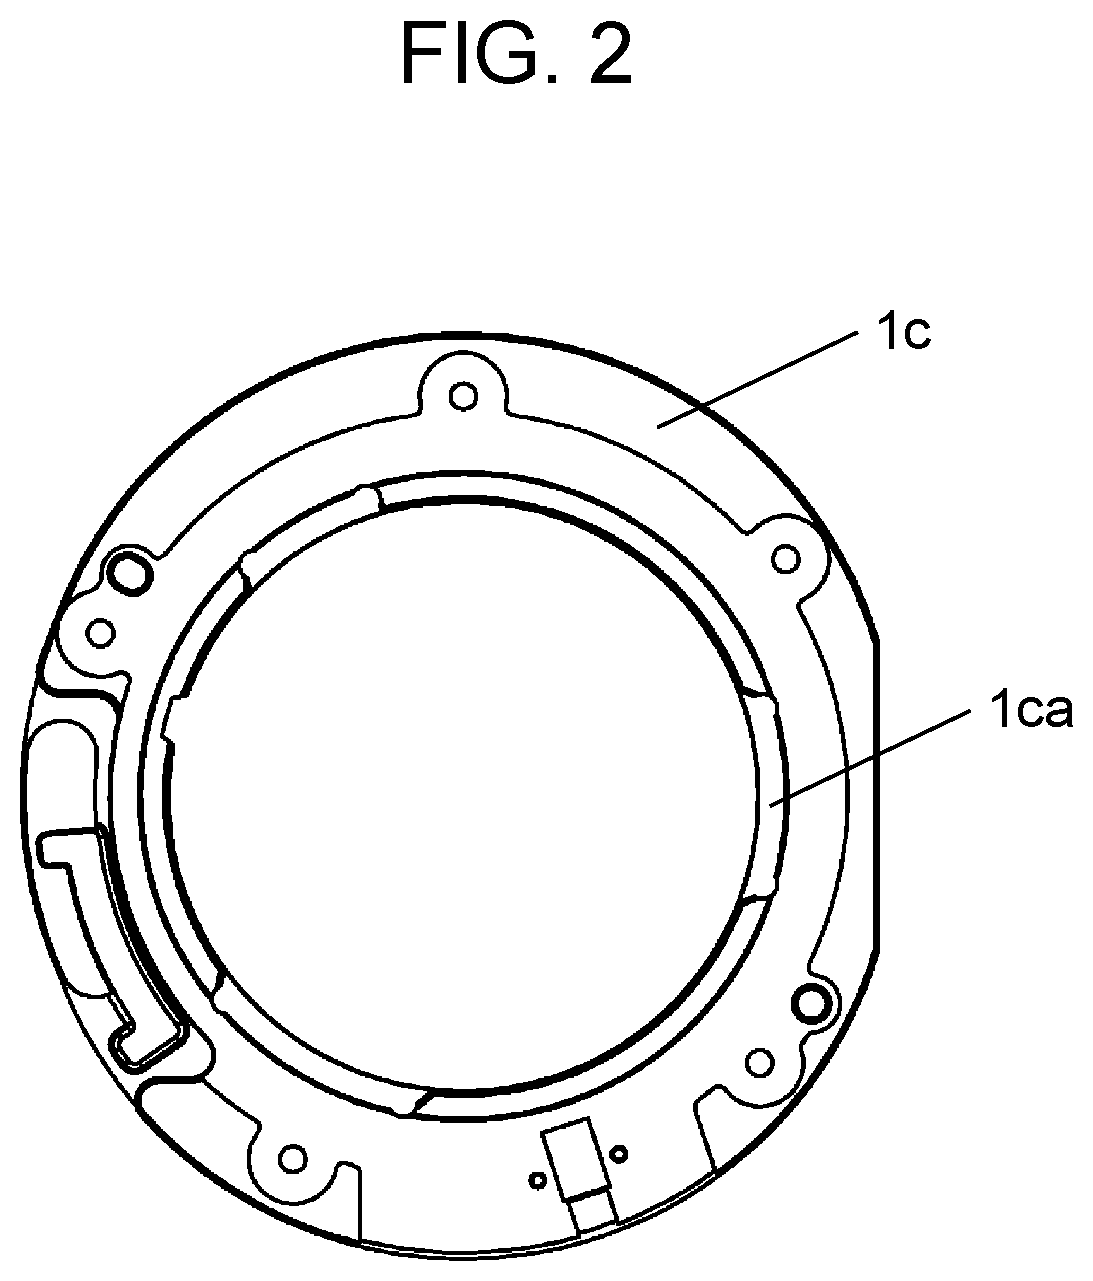 Lens mounting apparatus and projector